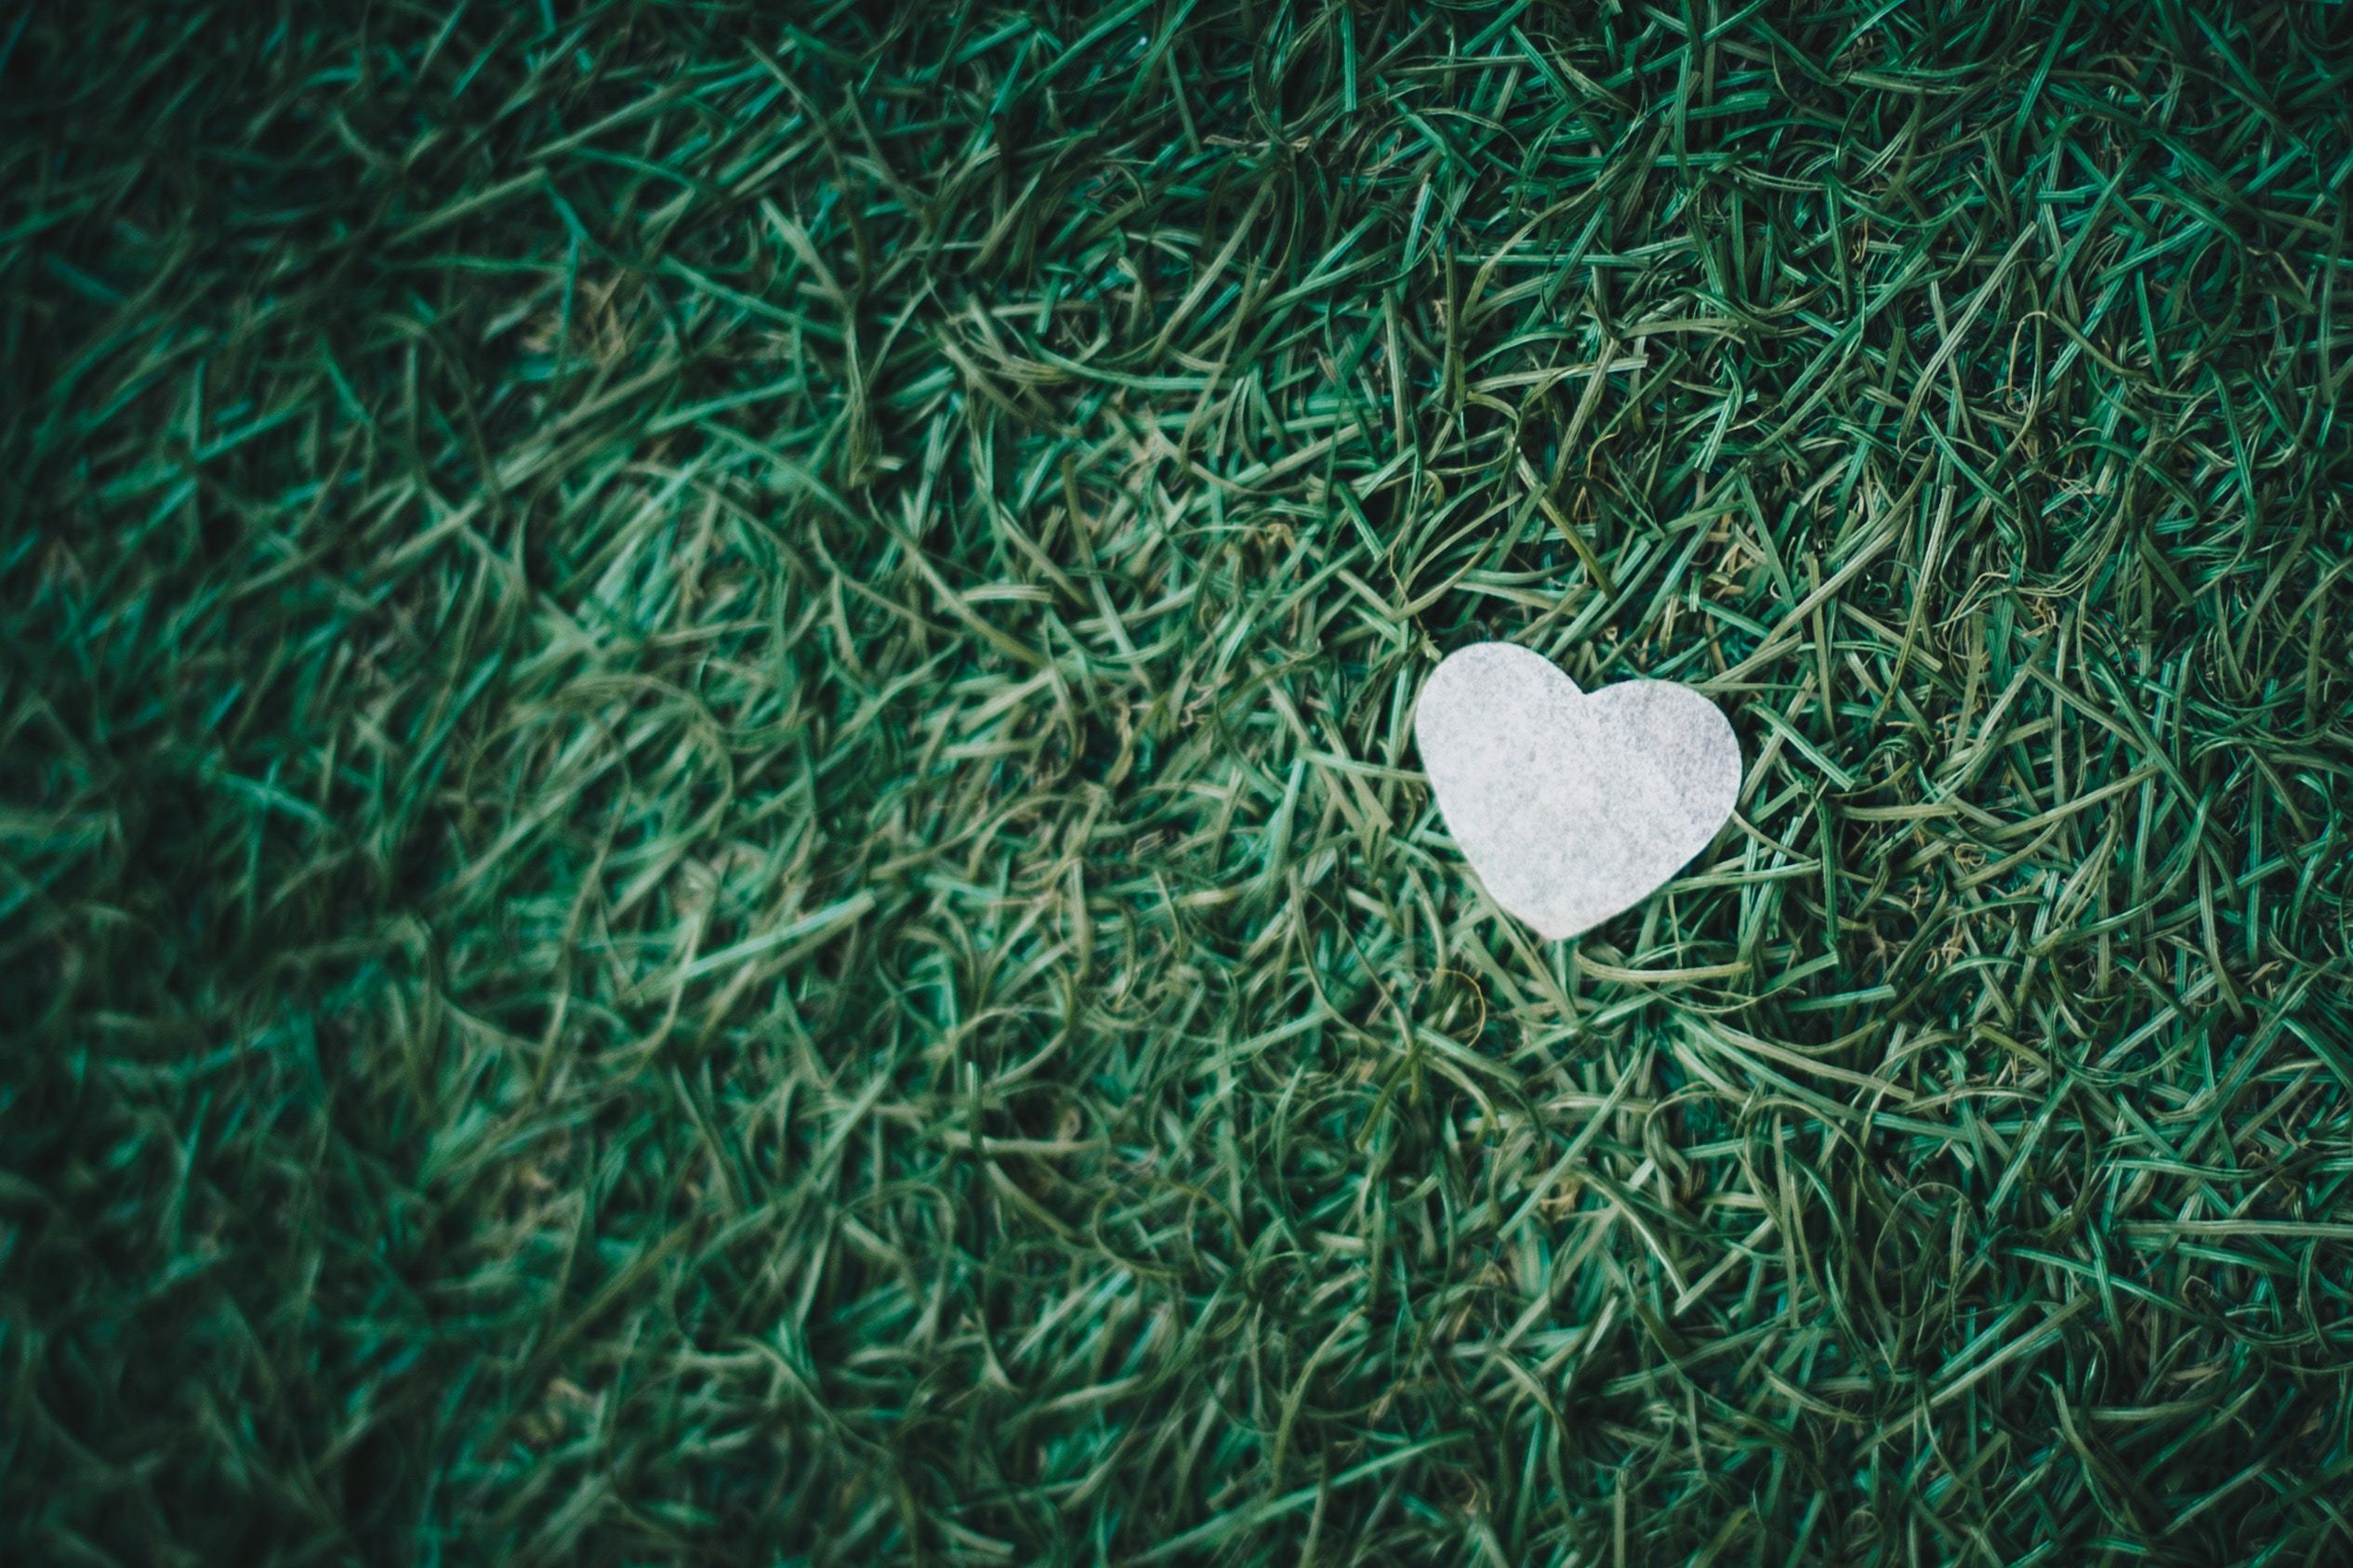 A white heart shaped piece of paper on green grass.